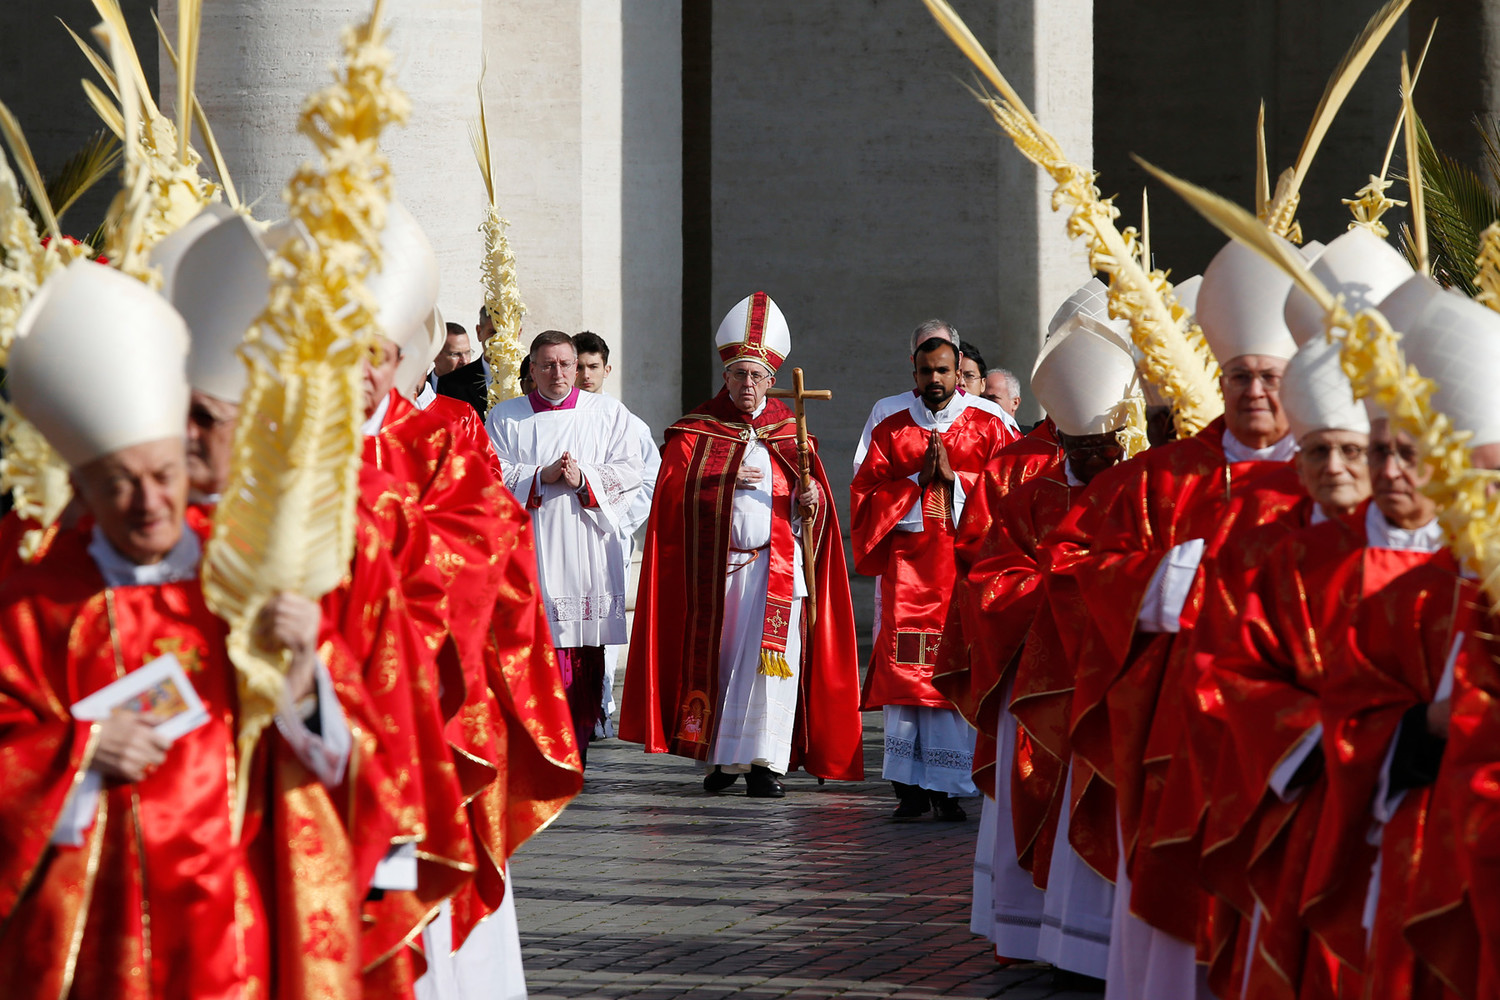 Pope Francis arrives in procession to celebrate Palm Sunday Mass in St. Peter's Square at the Vatican March 25.